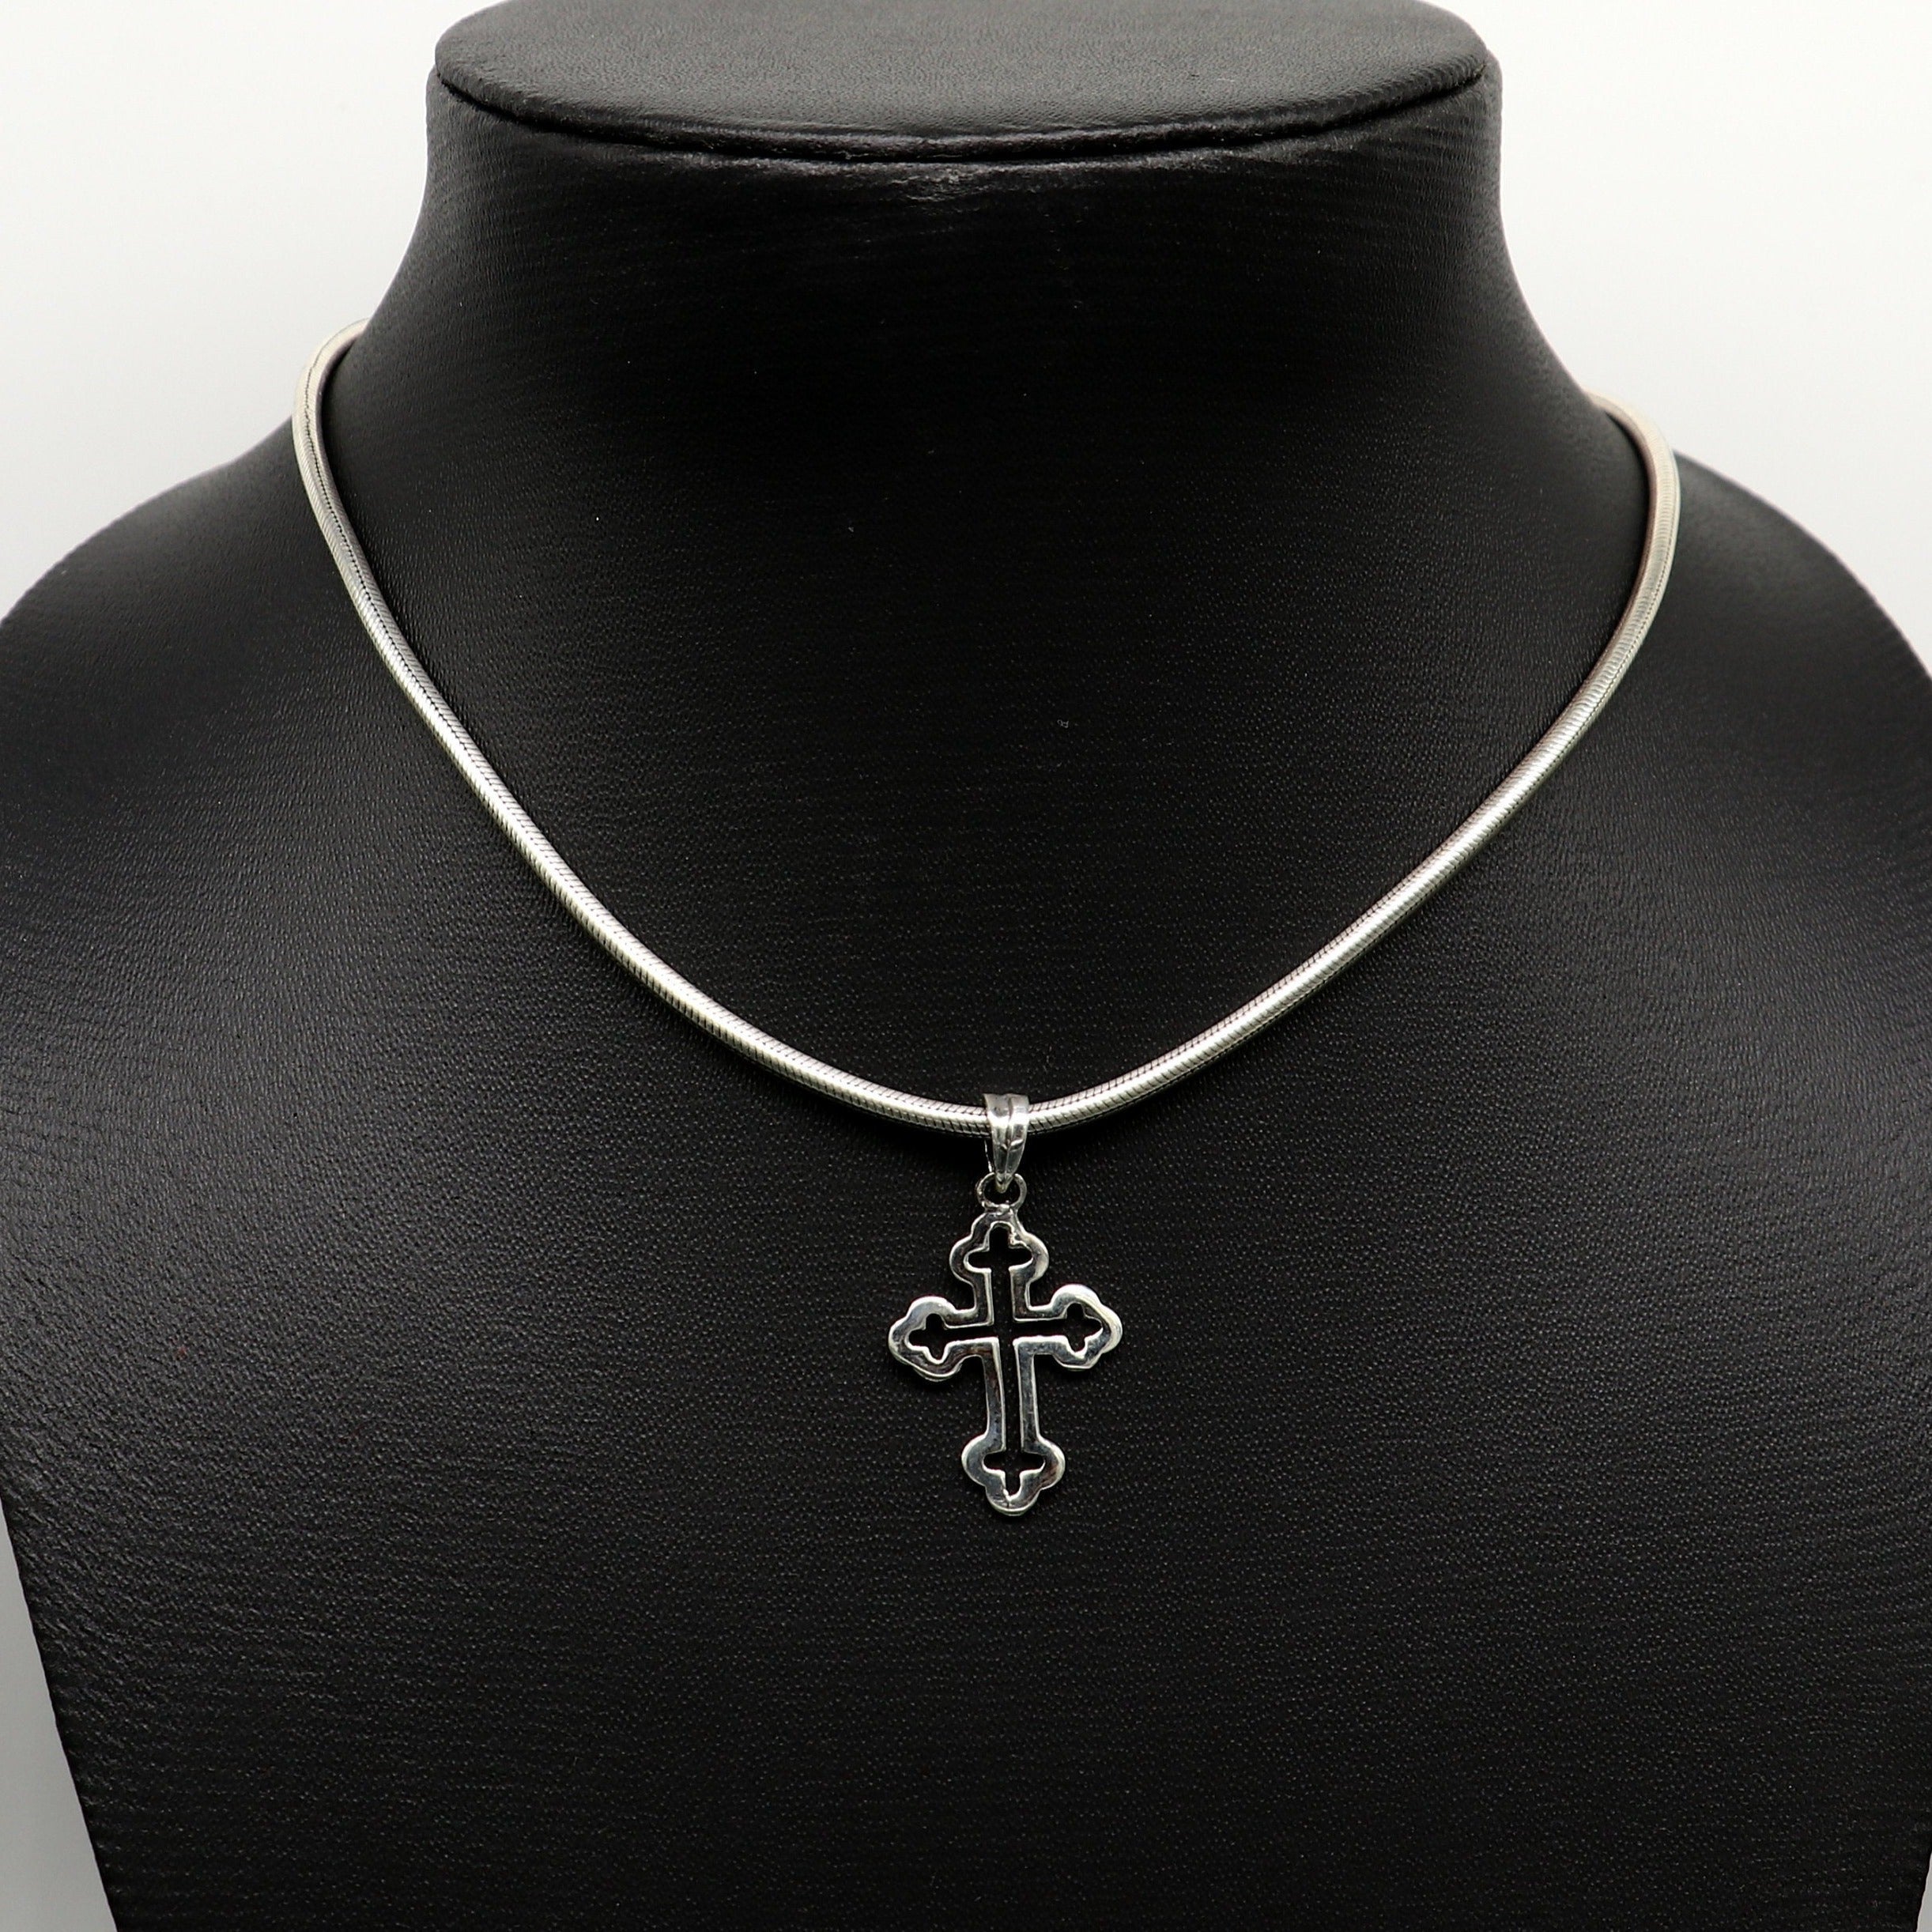 Personalized Cross Necklace,Custom Engraved Pendant Necklace for Men with  Your Text | Personalized cross necklace, Engraved cross necklace, Cross  necklace